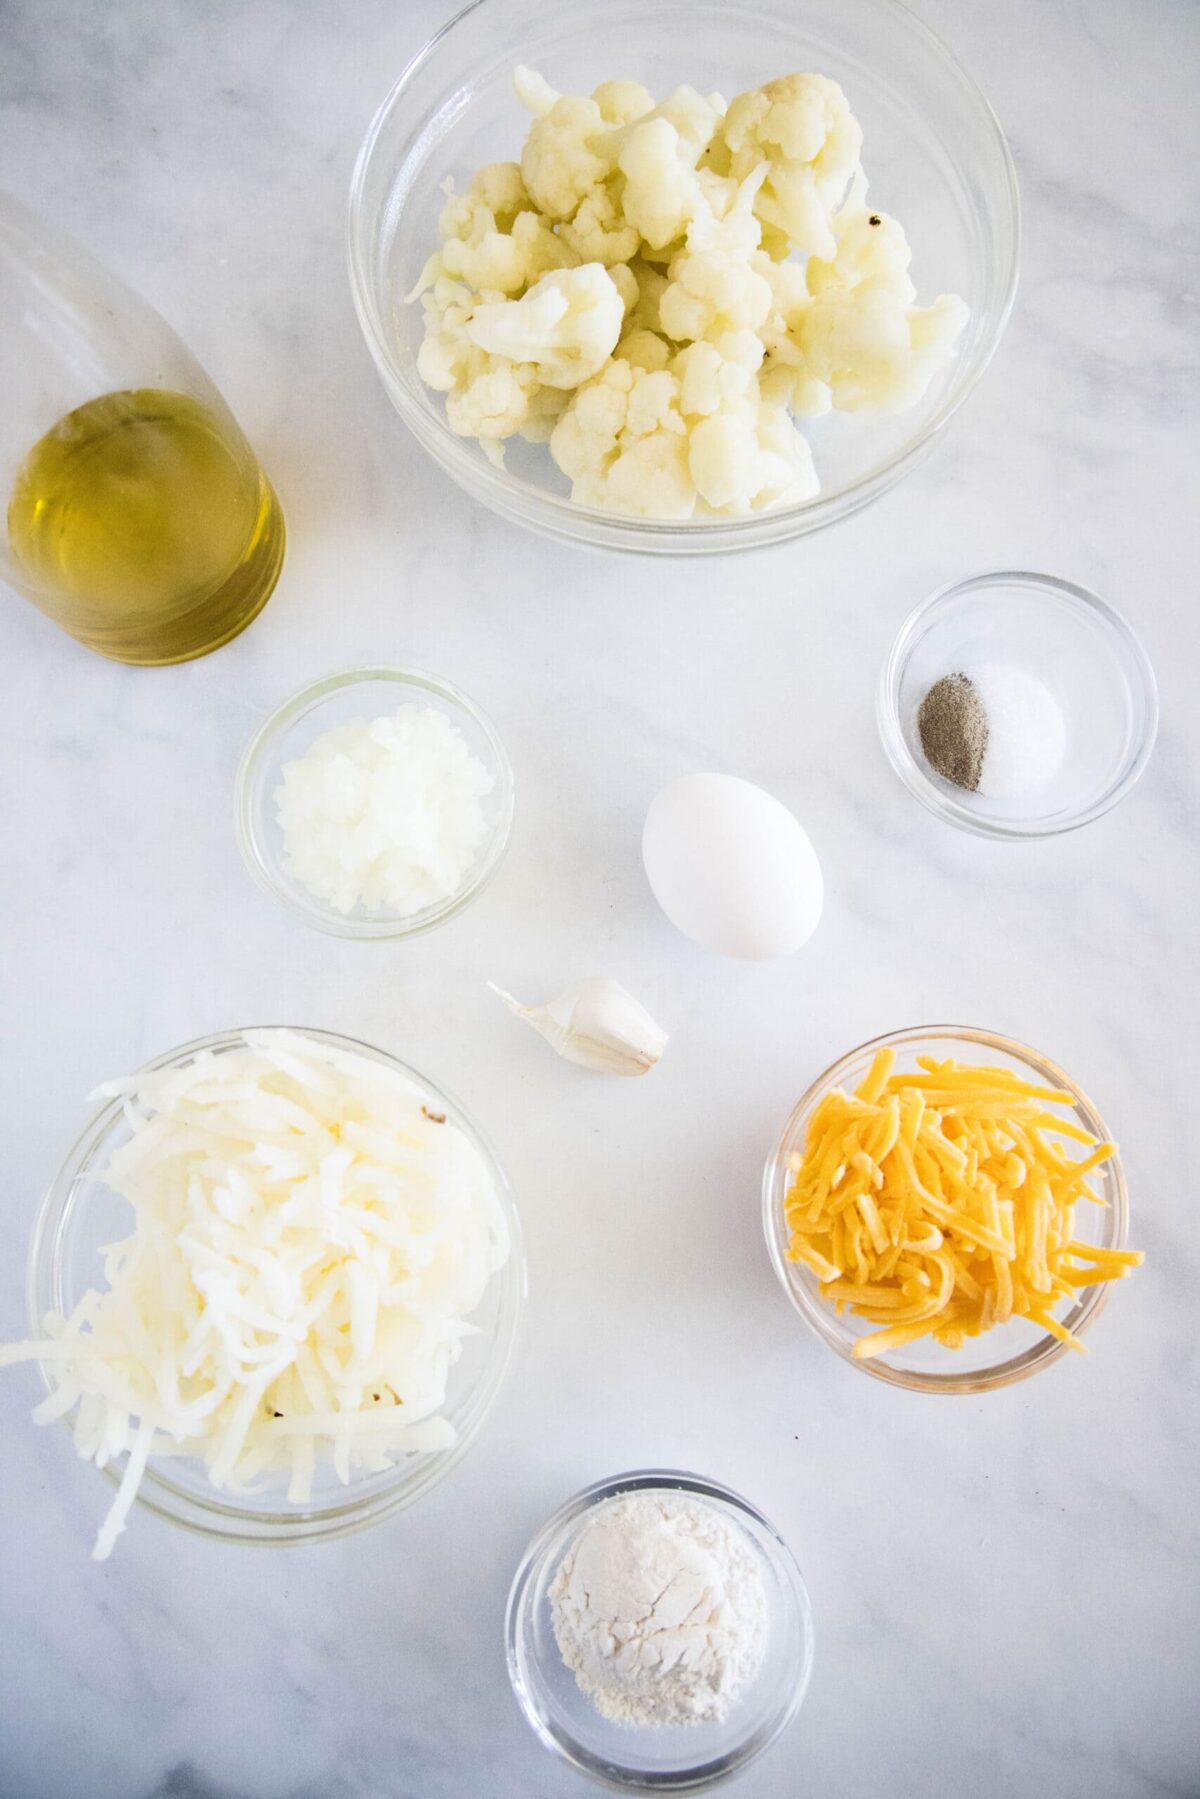 Overhead view of the ingredients needed to make cauliflower fritters: a bowl of cauliflower florets, a bowl of shredded hash browns, a bowl of grated cheddar cheese, a glass of olive oil, a bowl of salt and pepper, a bowl of chopped onion, a bowl of flour, a garlic clove, and an egg